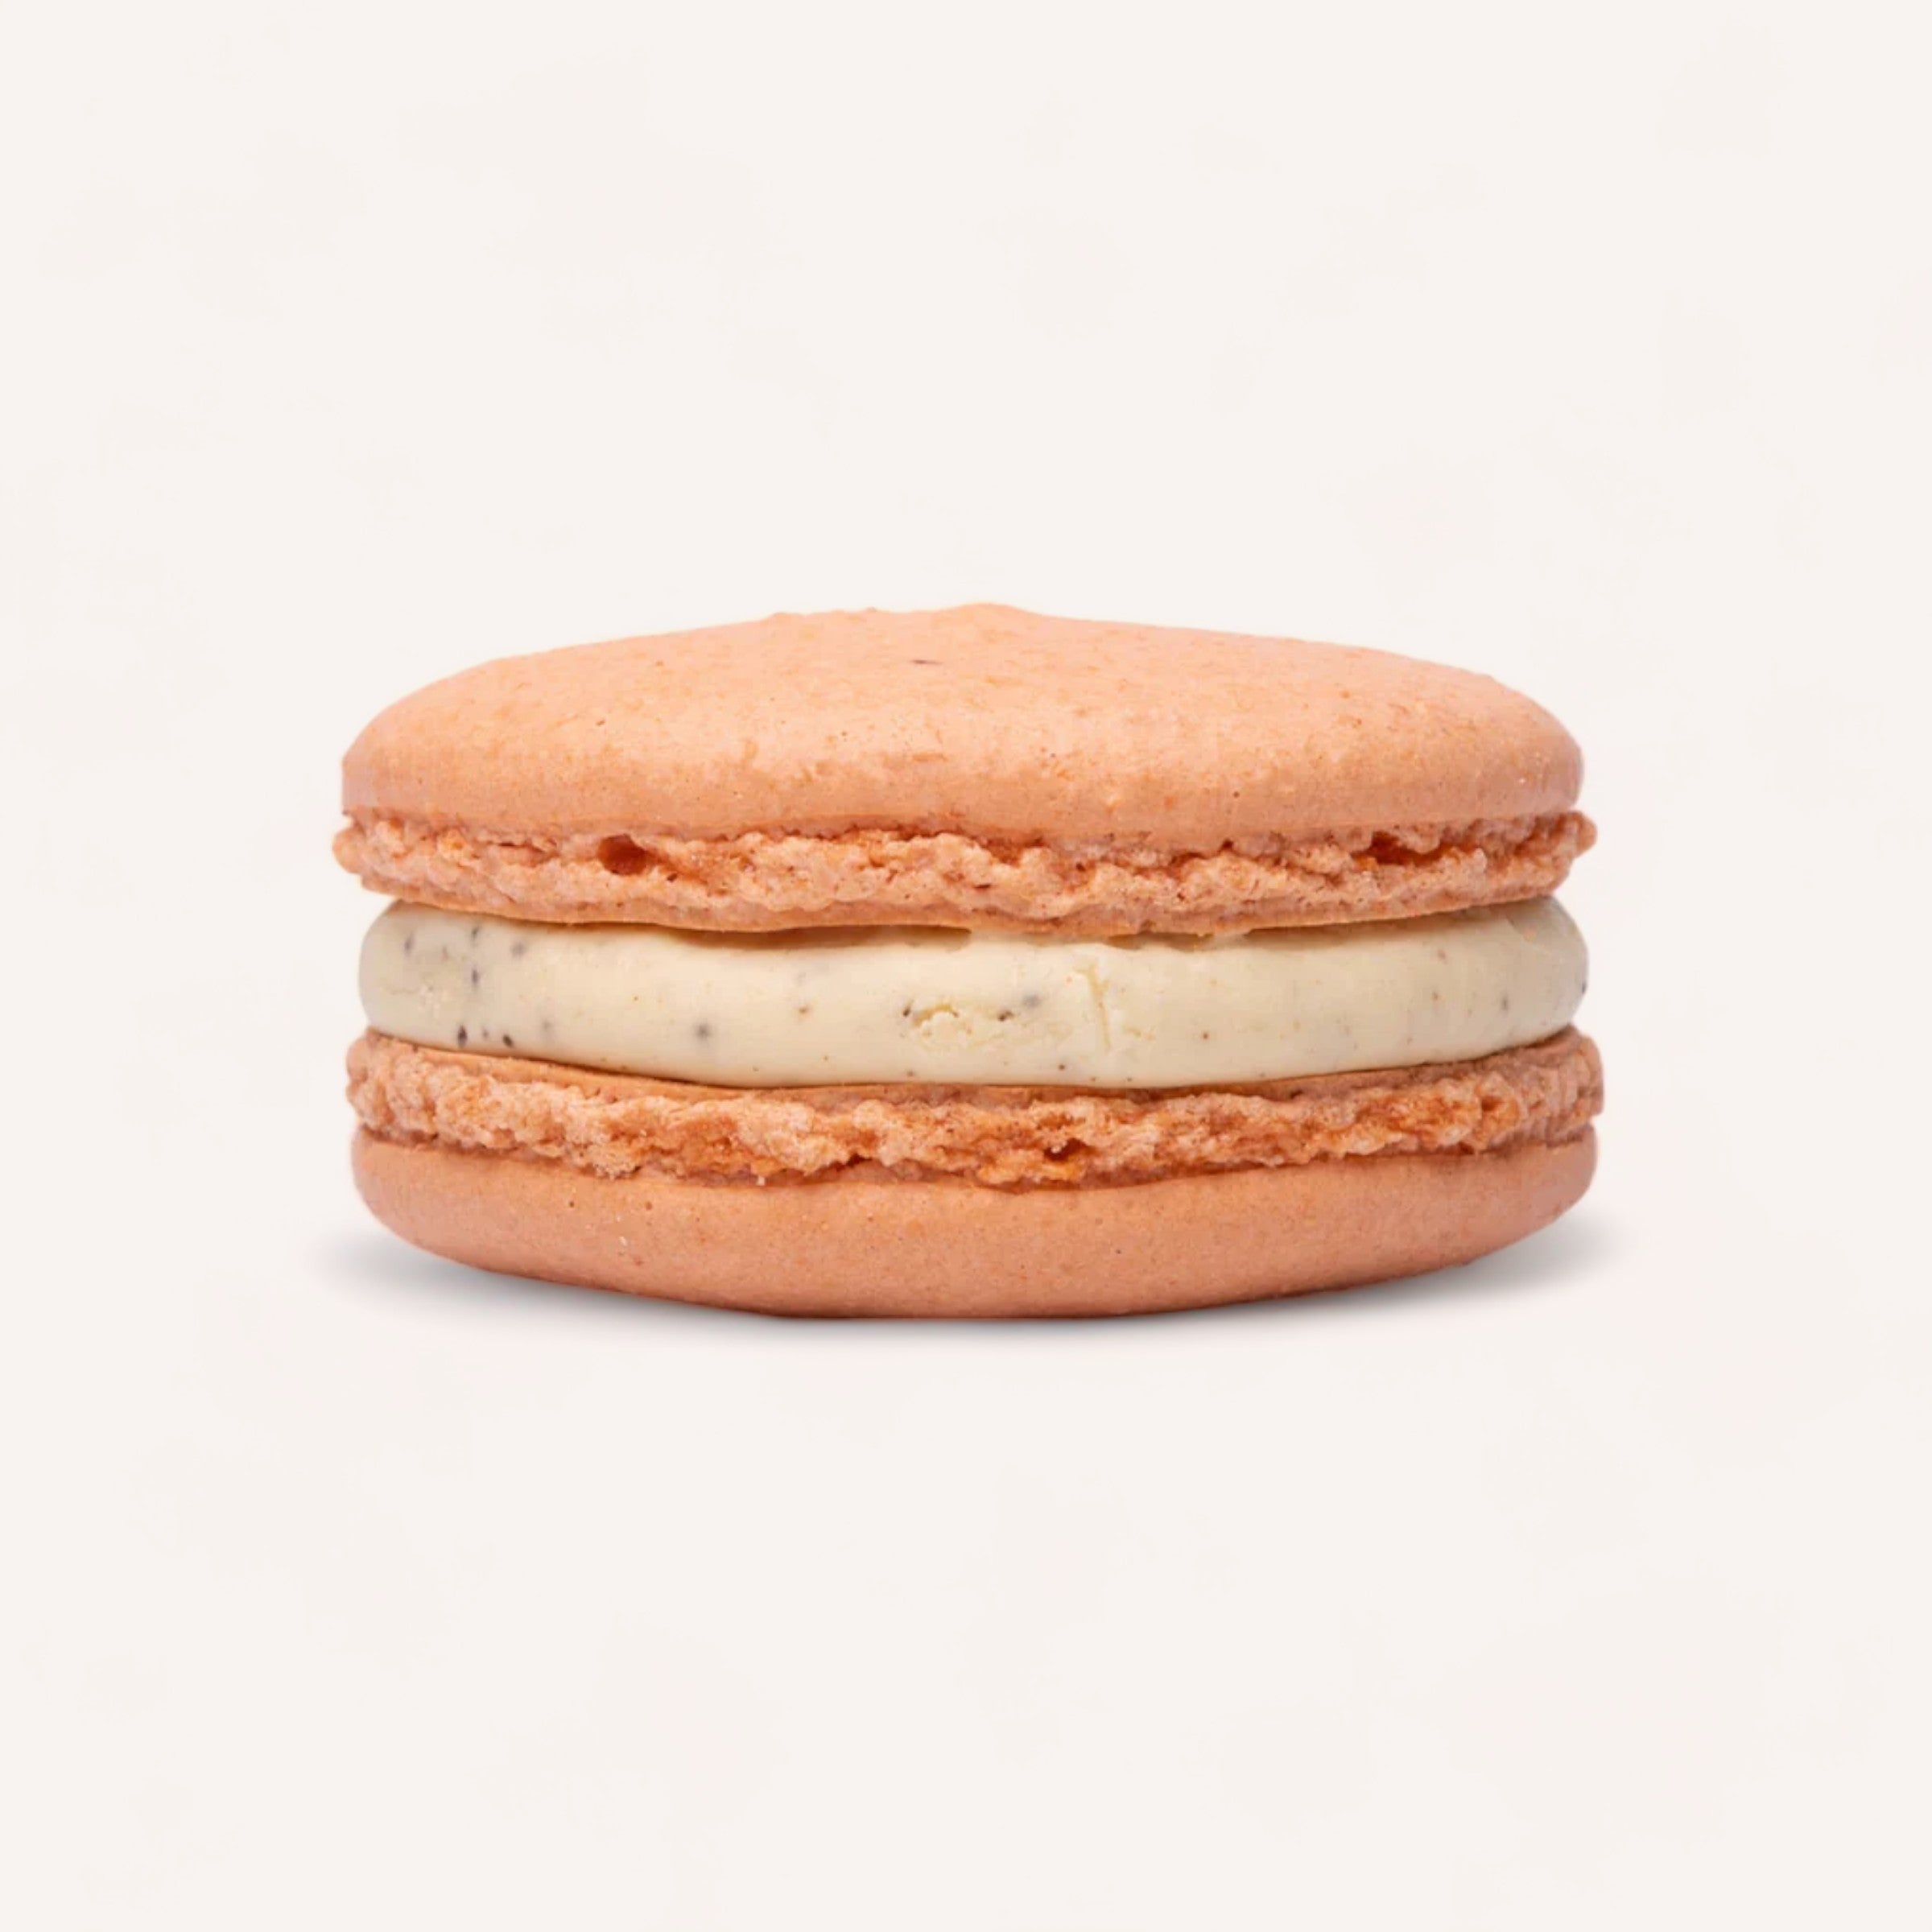 A single Box of 6 Macarons by J'aime les Macarons with a light pink shell and cream filling, presented on a white background.